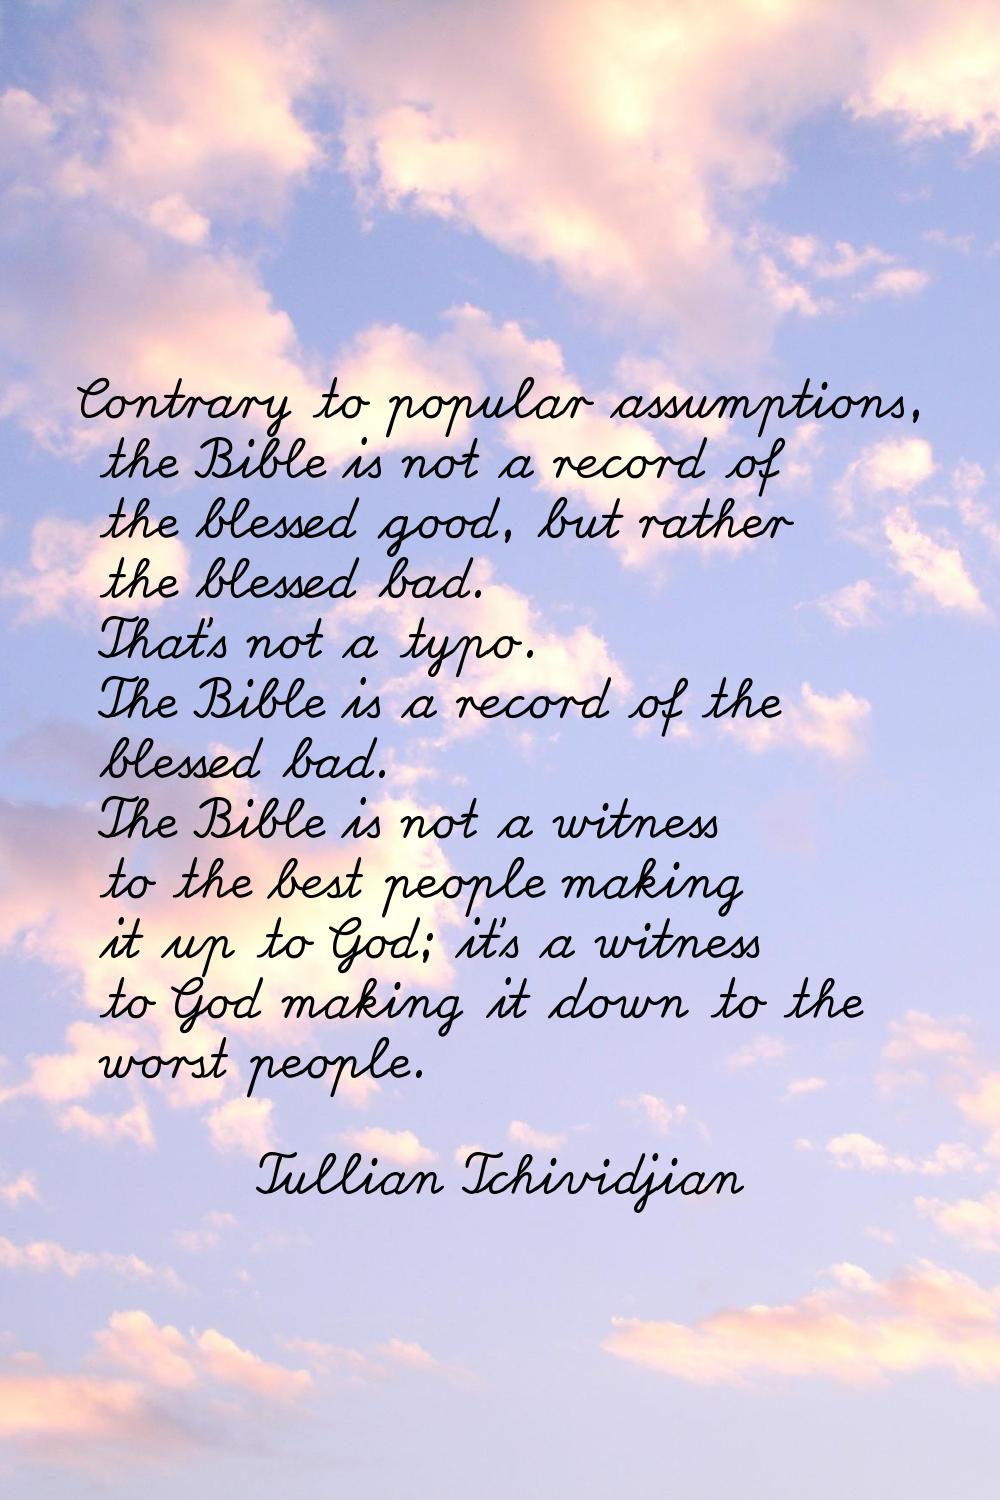 Contrary to popular assumptions, the Bible is not a record of the blessed good, but rather the bles